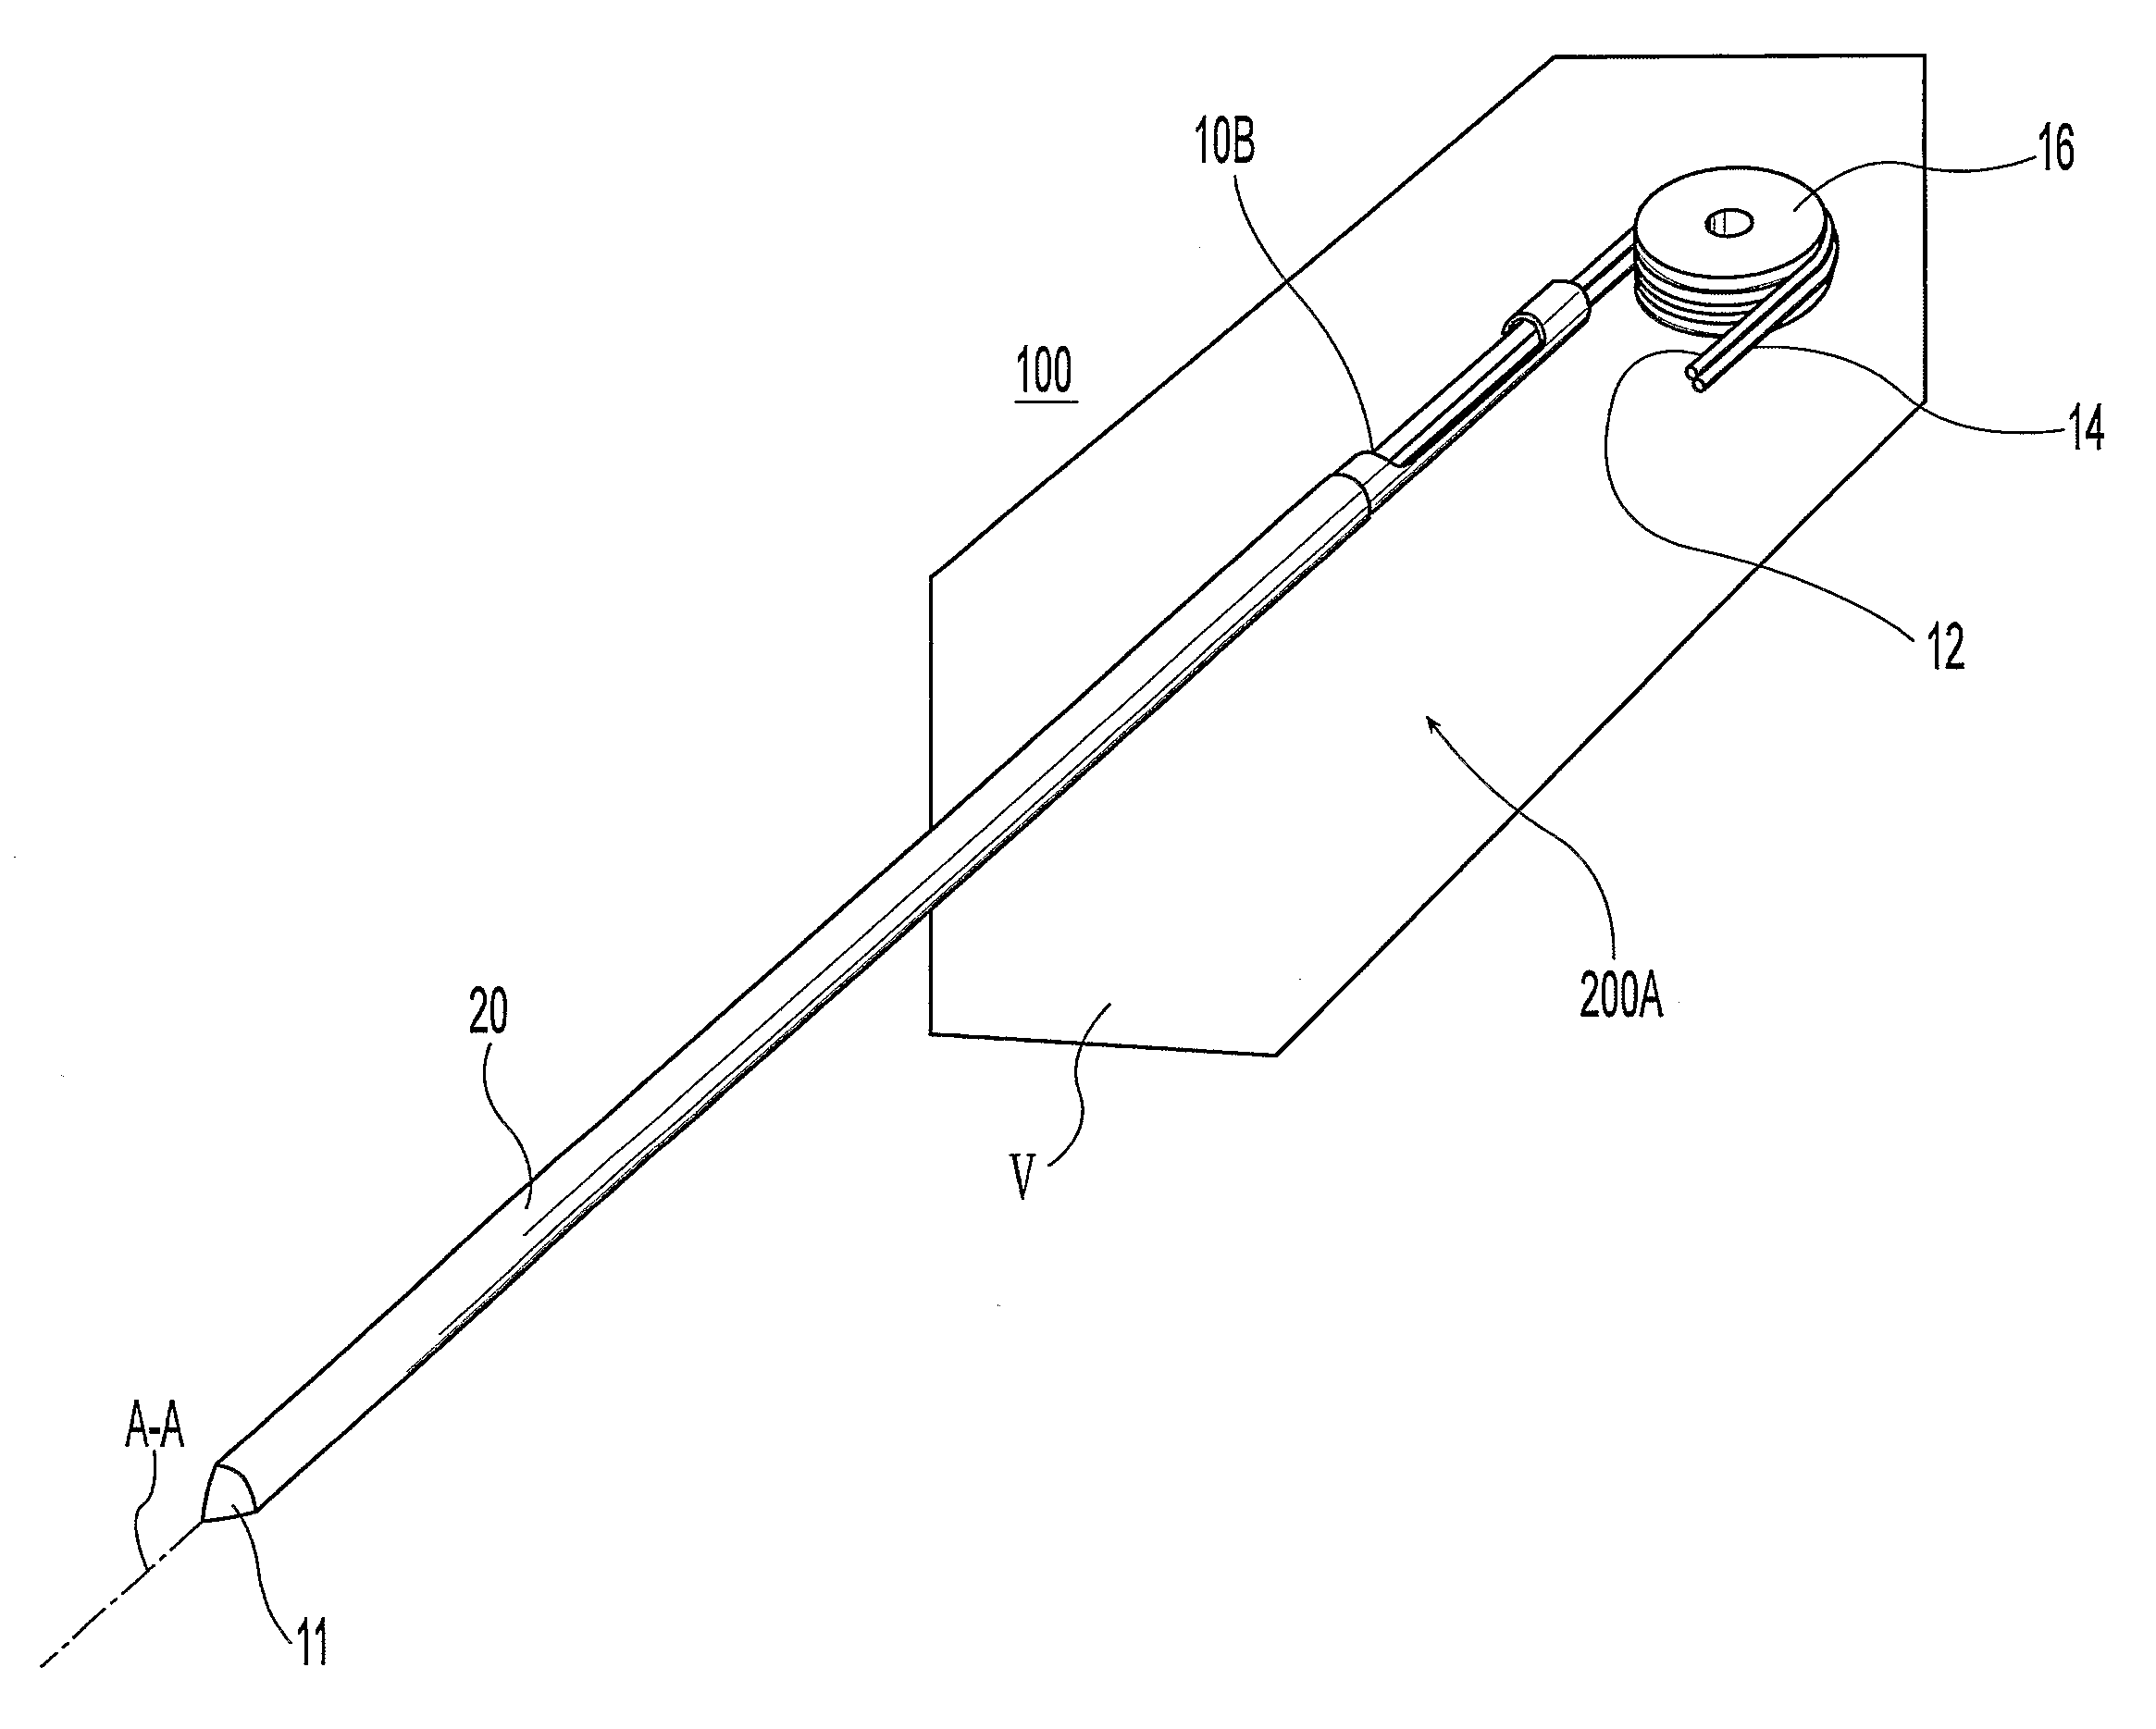 Single-insertion, multiple sample biopsy device with integrated markers